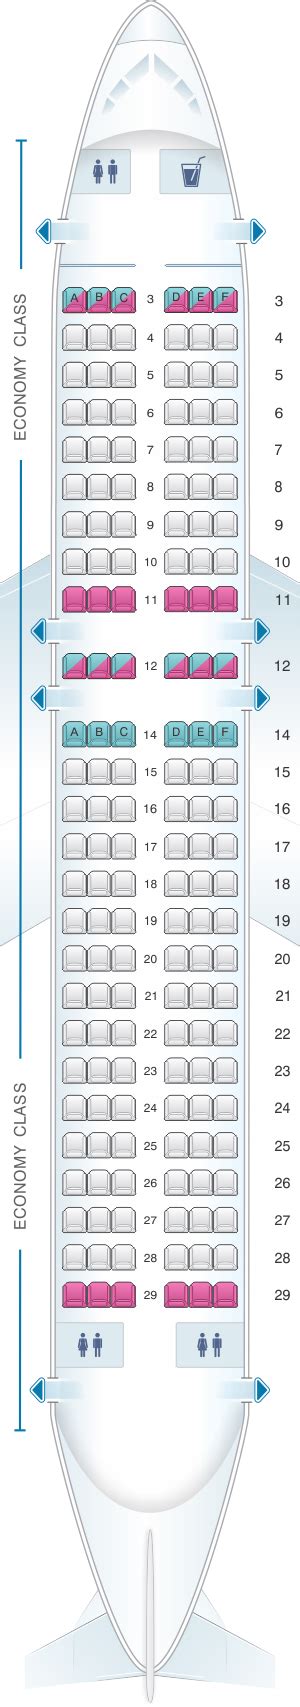 Get Airbus A319 Seating Chart Allegiant Air Images Airbus Way